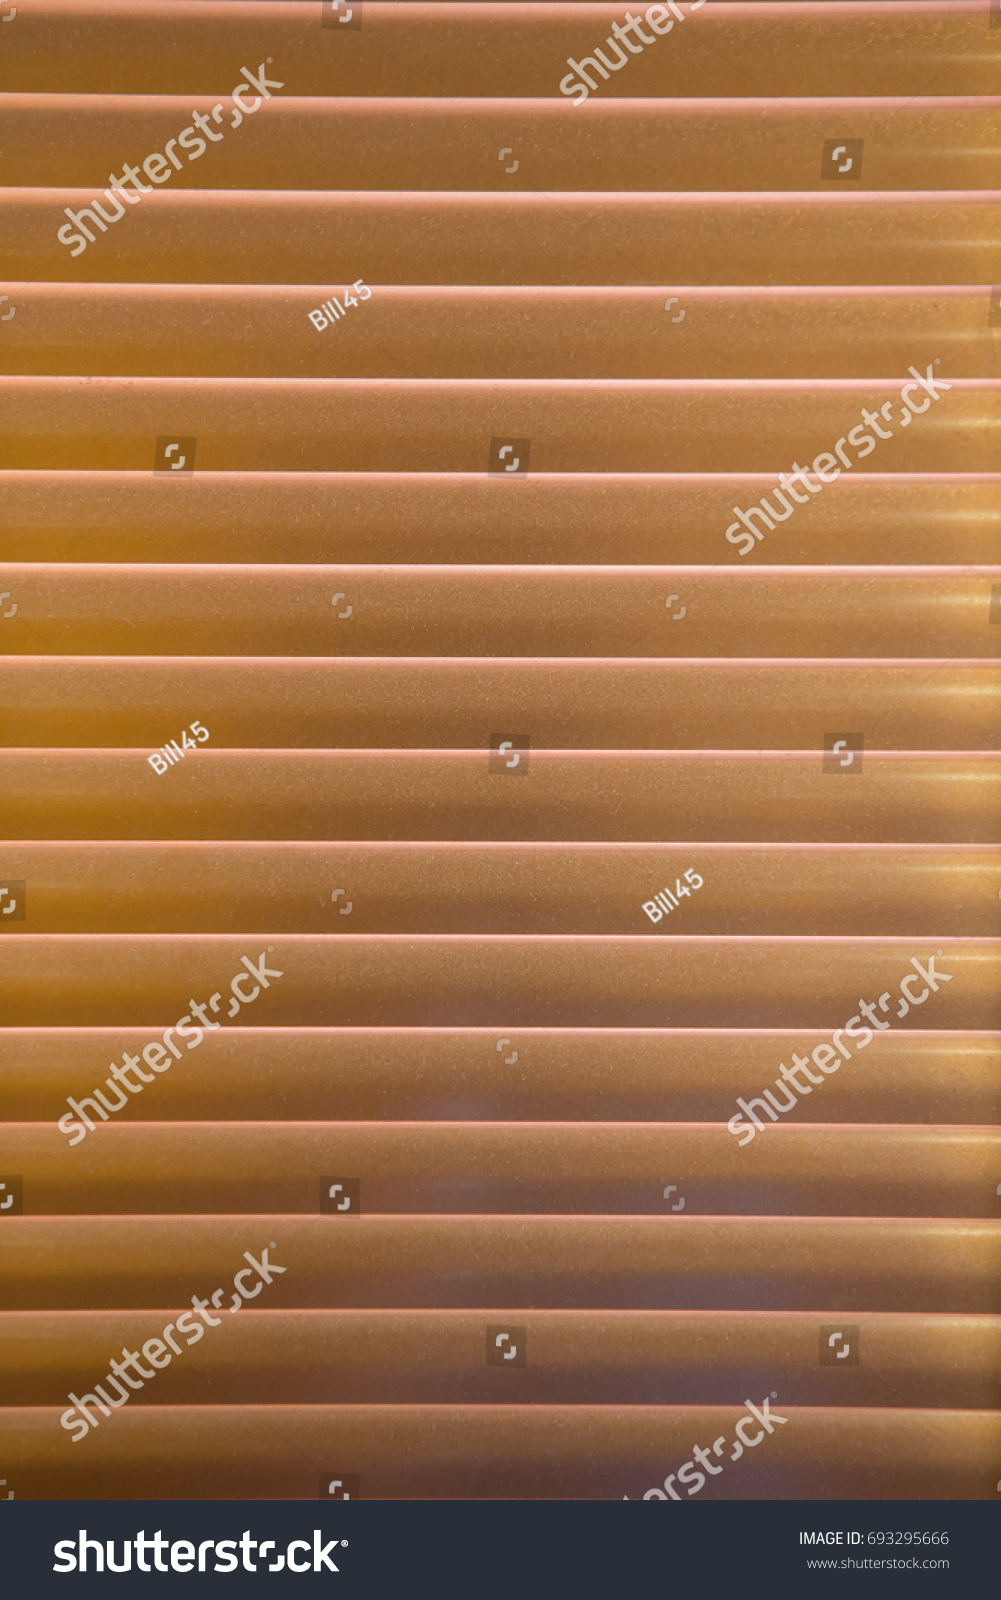 Horizontal pattern of gold venetian blinds in a gradation of color #693295666